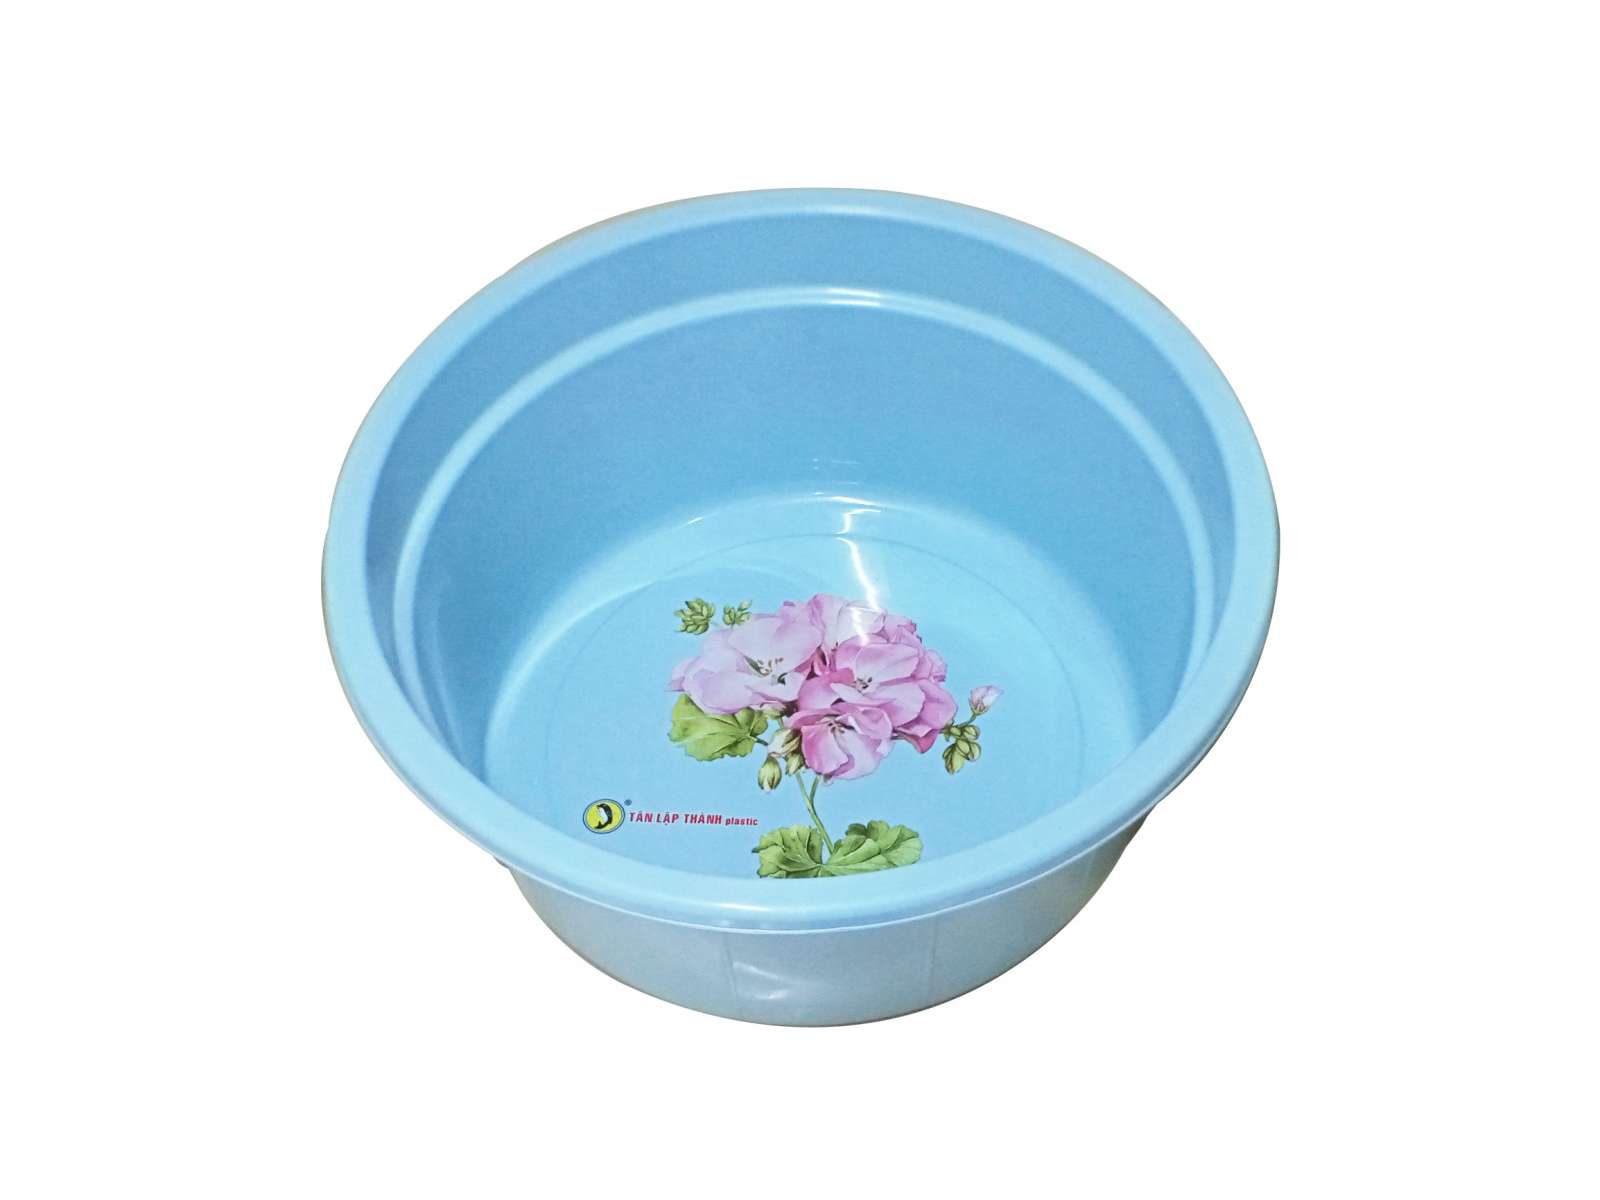 Deep basin with flower pattern